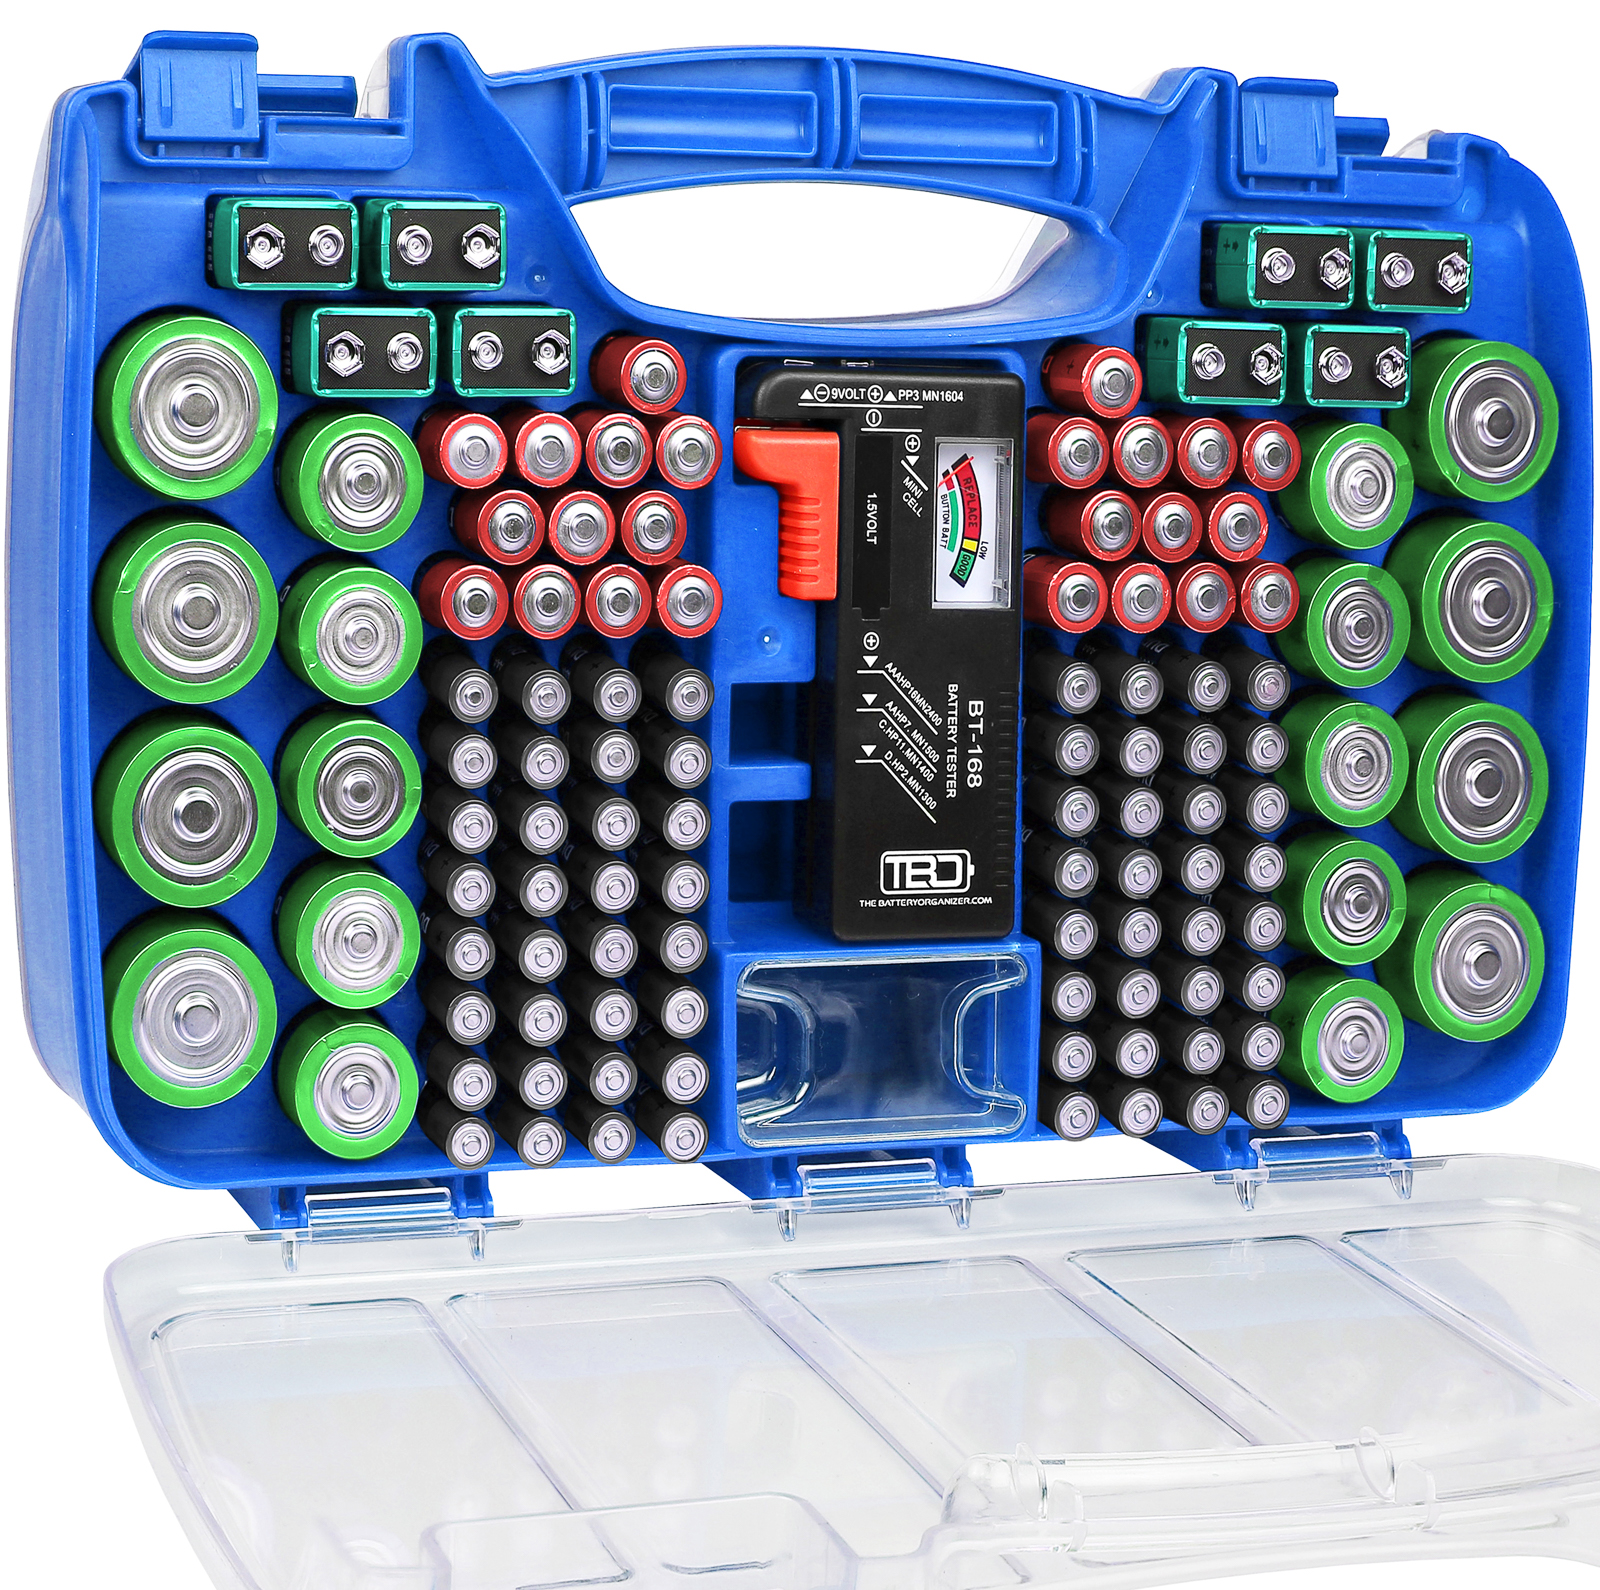 The Battery Organizer Battery Storage Case with Hinged Clear Cover, Includes a Removable Battery Tester, Holds 180 Batteries Various Sizes Blue. - image 4 of 7